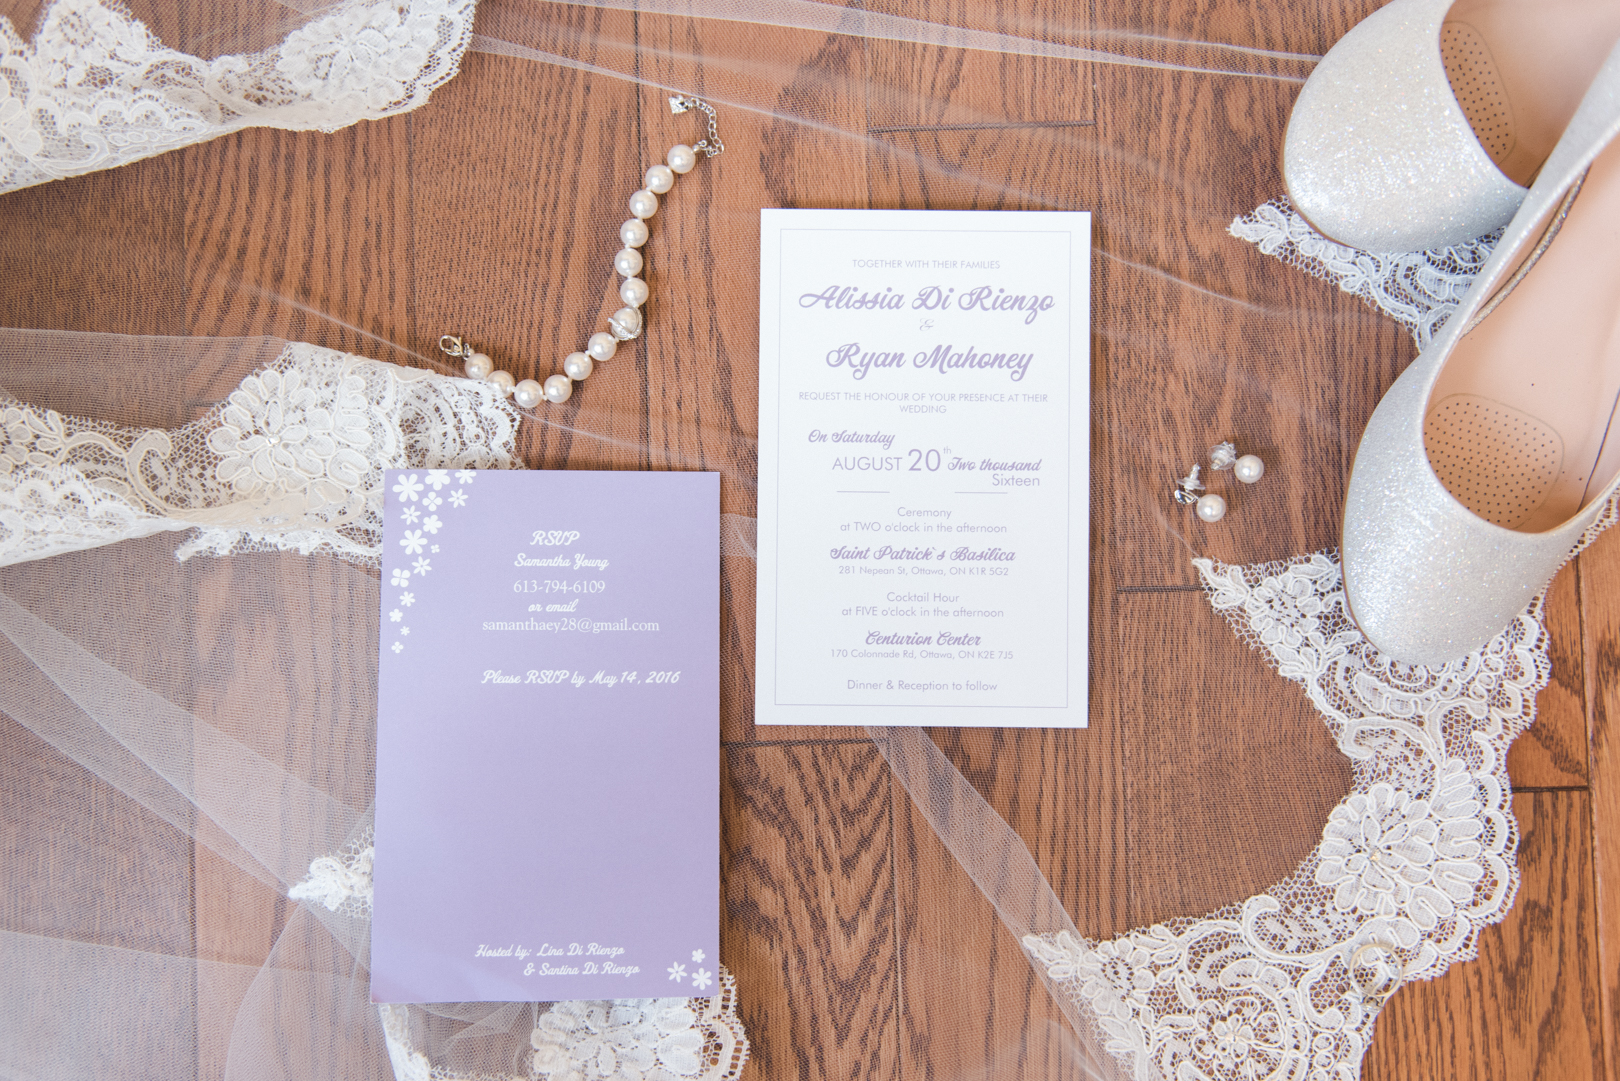 bride's cathedral veil with wedding invitations